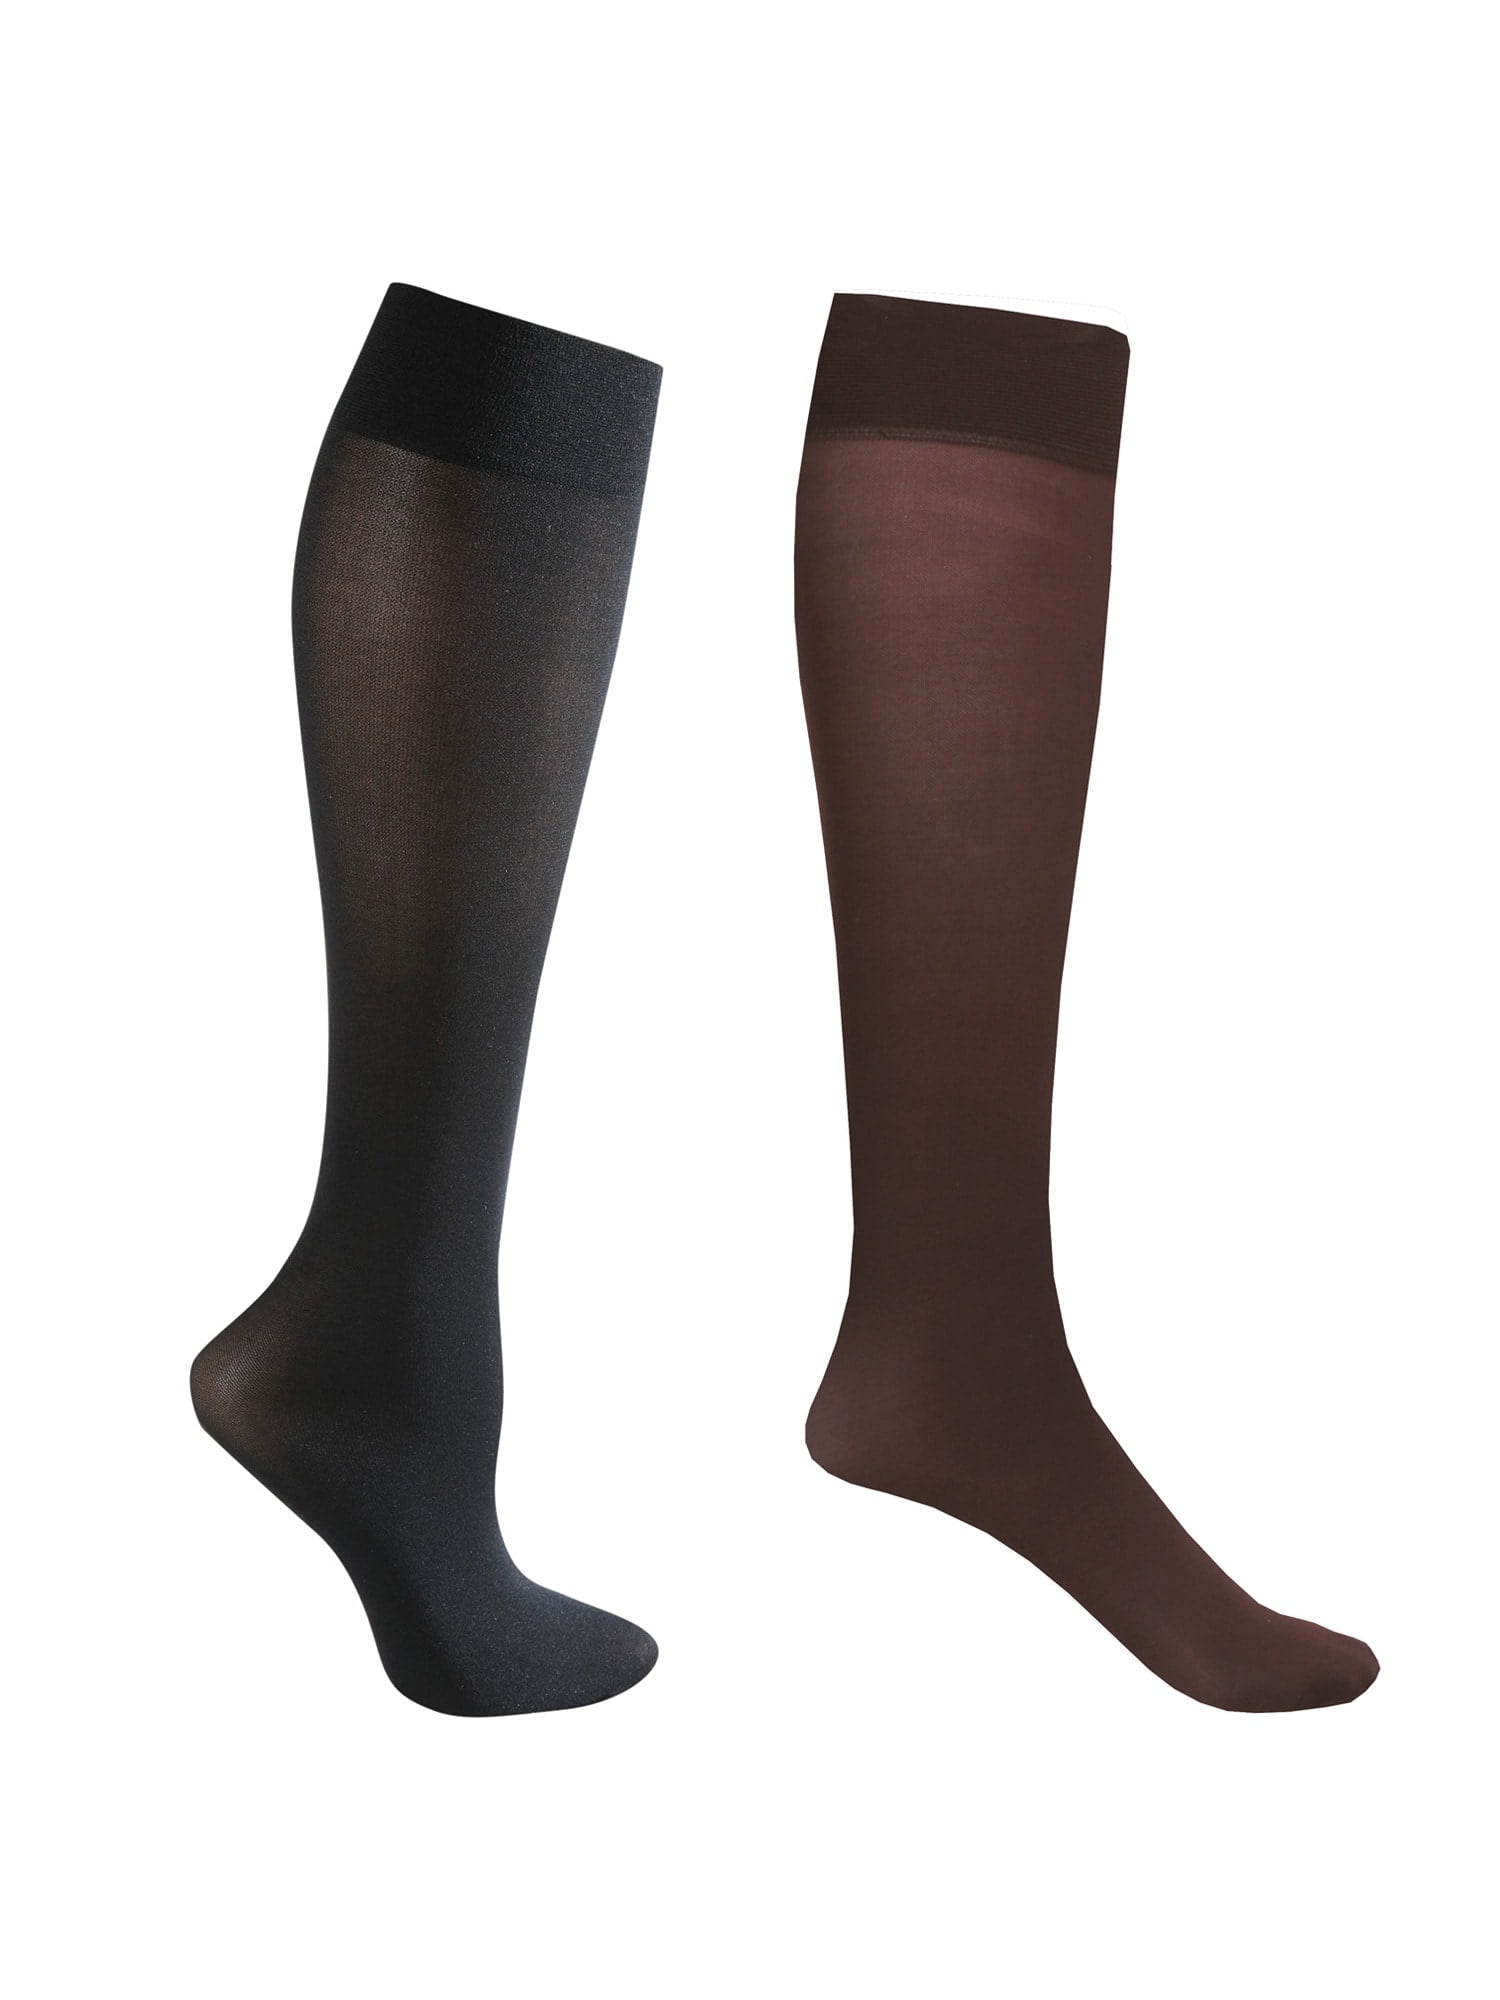 2 Pair Mild Support Knee High Stockings - 8-15 mmHg Compression ...